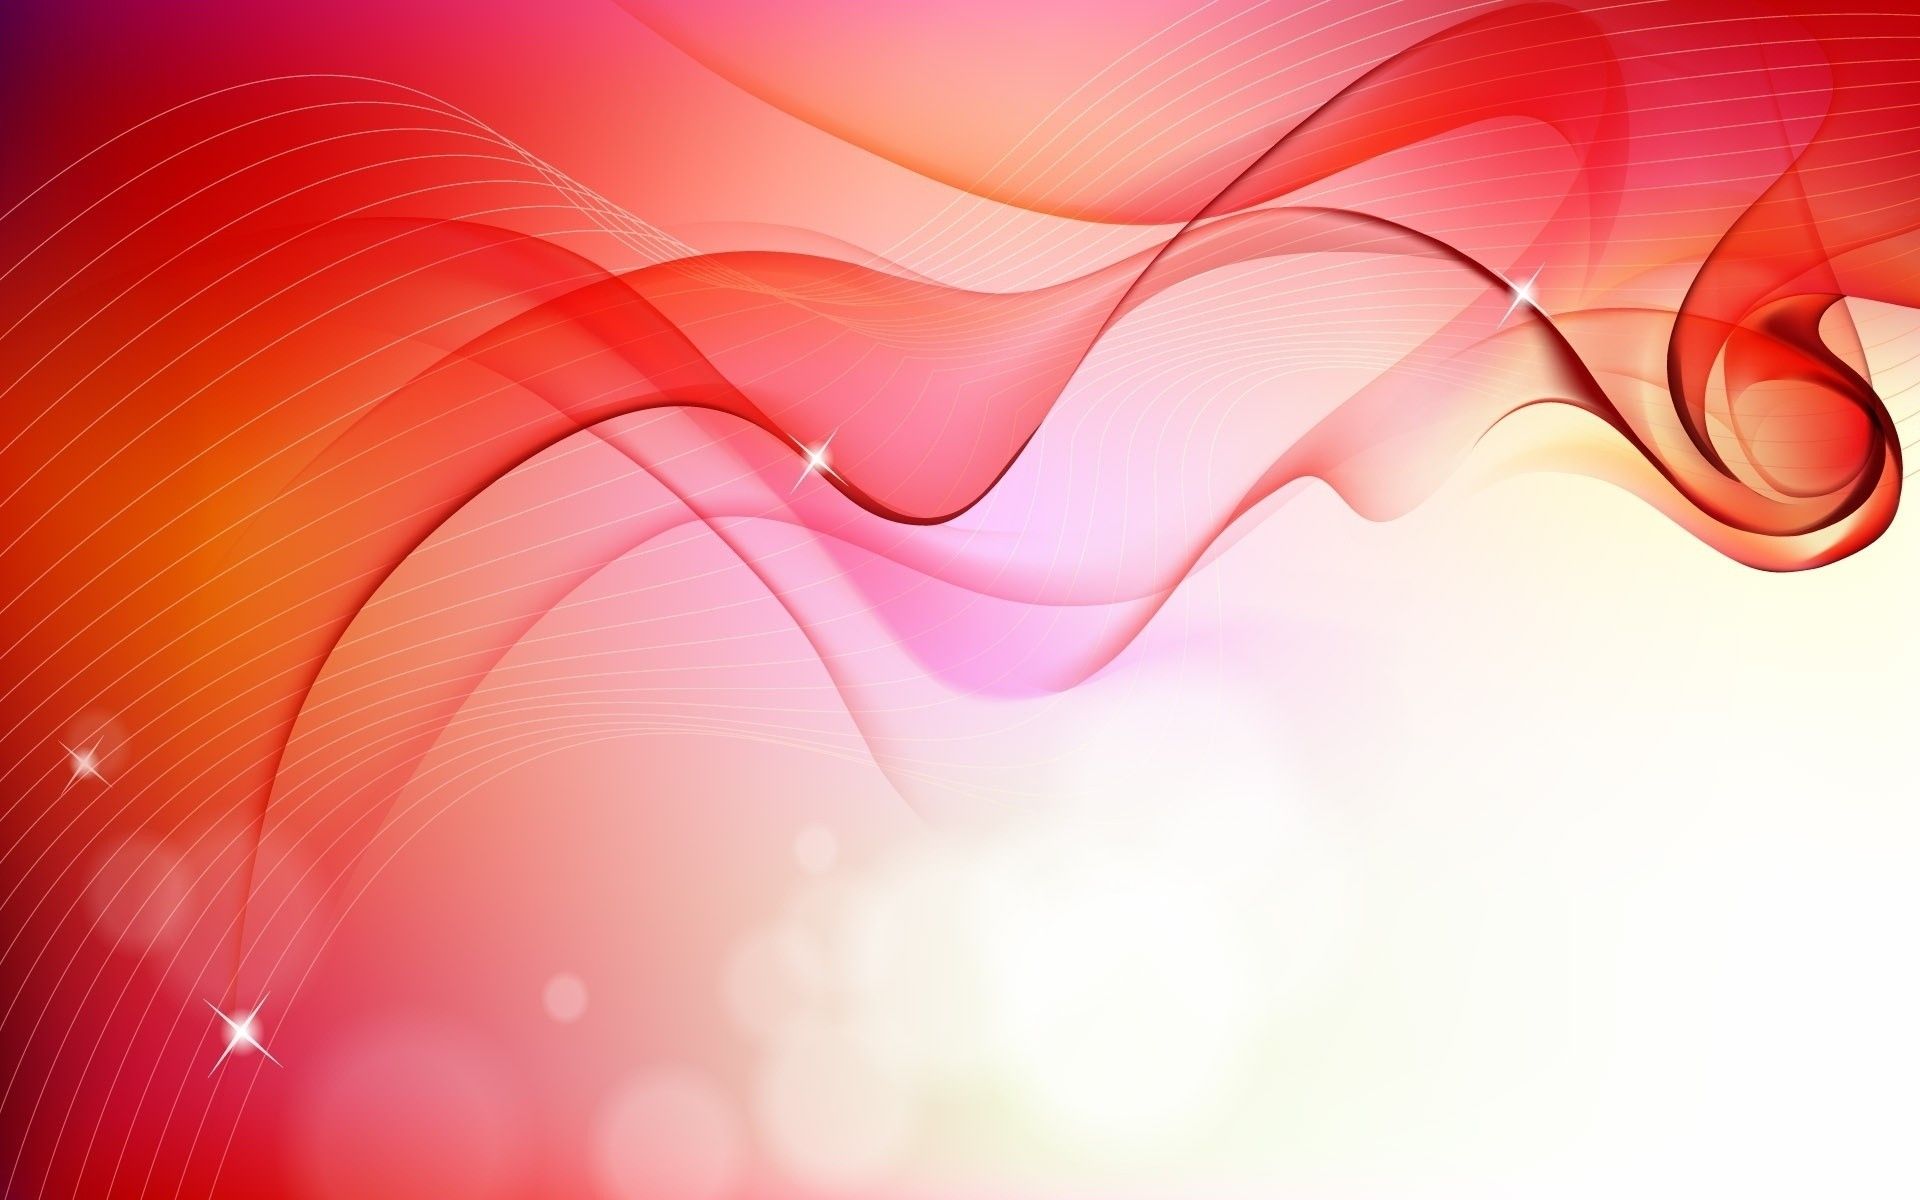 Download Wallpaper 1920x1200 Wavy, Red, White, Surface 1920x1200 ...